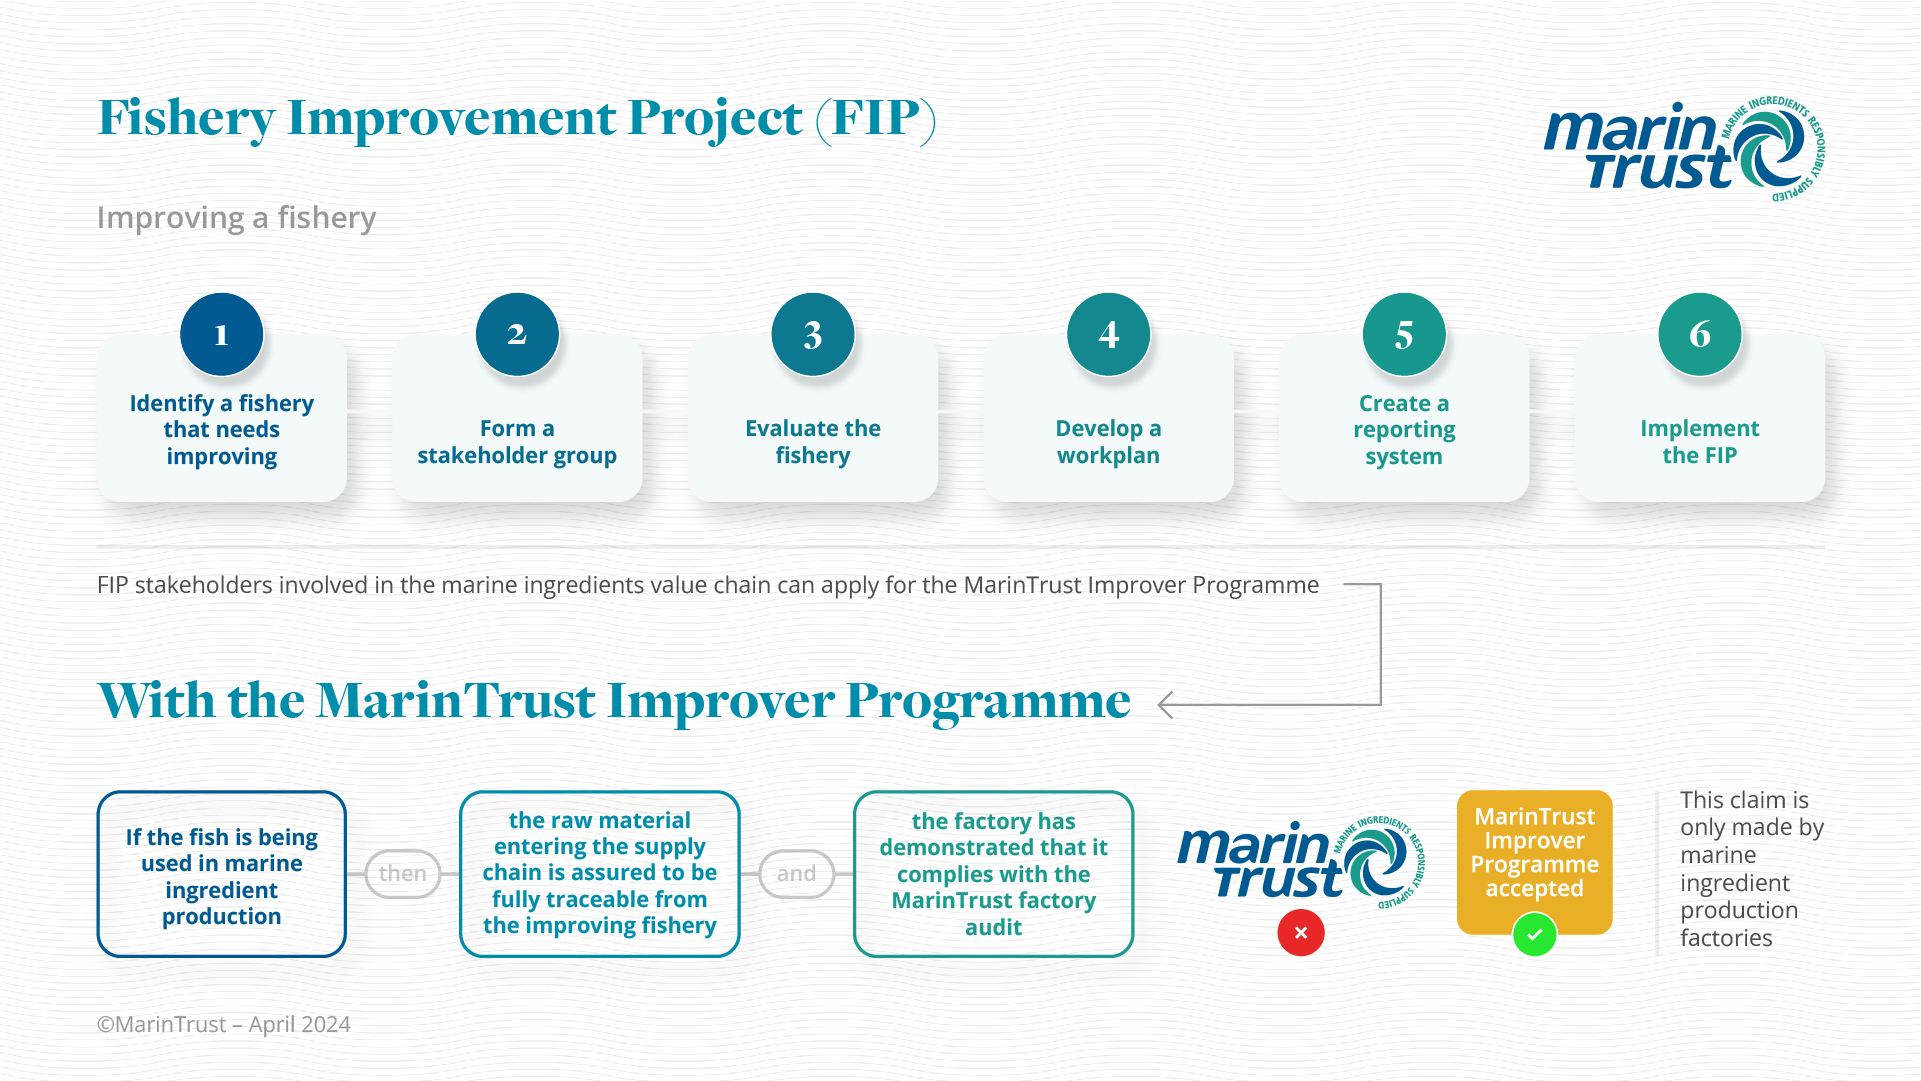 FIP and Improver Programme